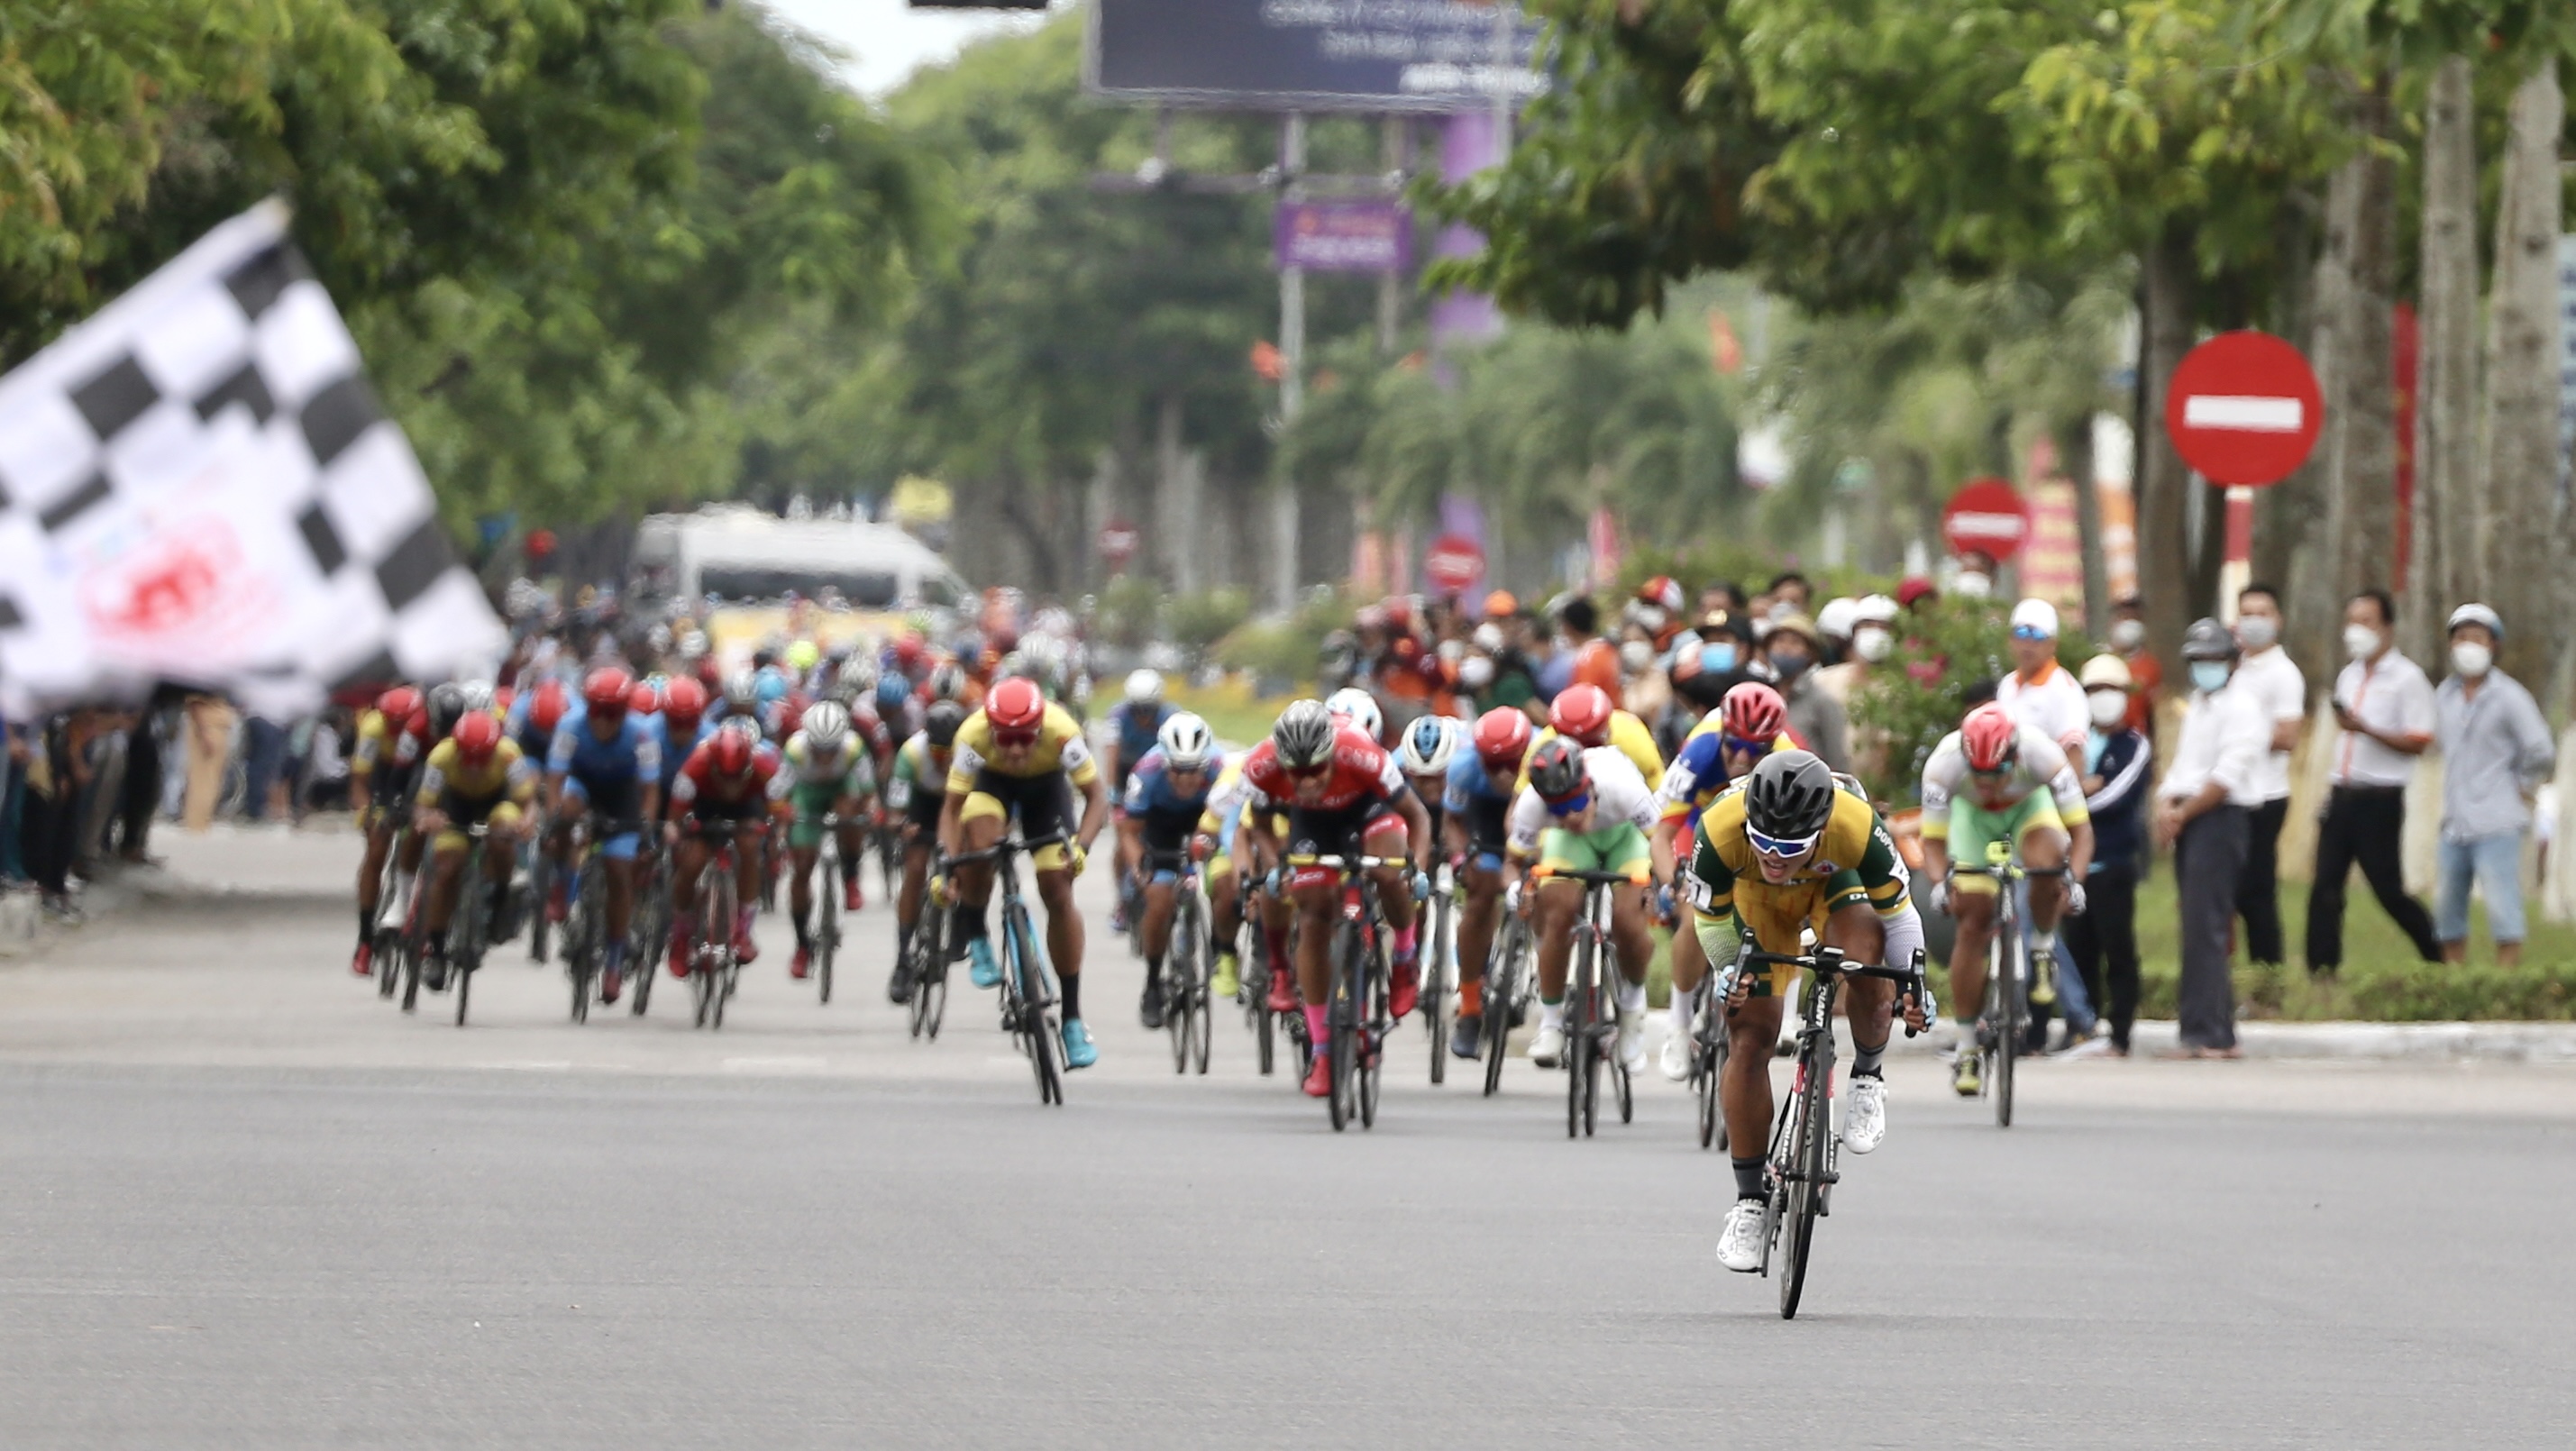 Fall near finish line costs Vietnamese rider lead position in mountains classification at national cycling race